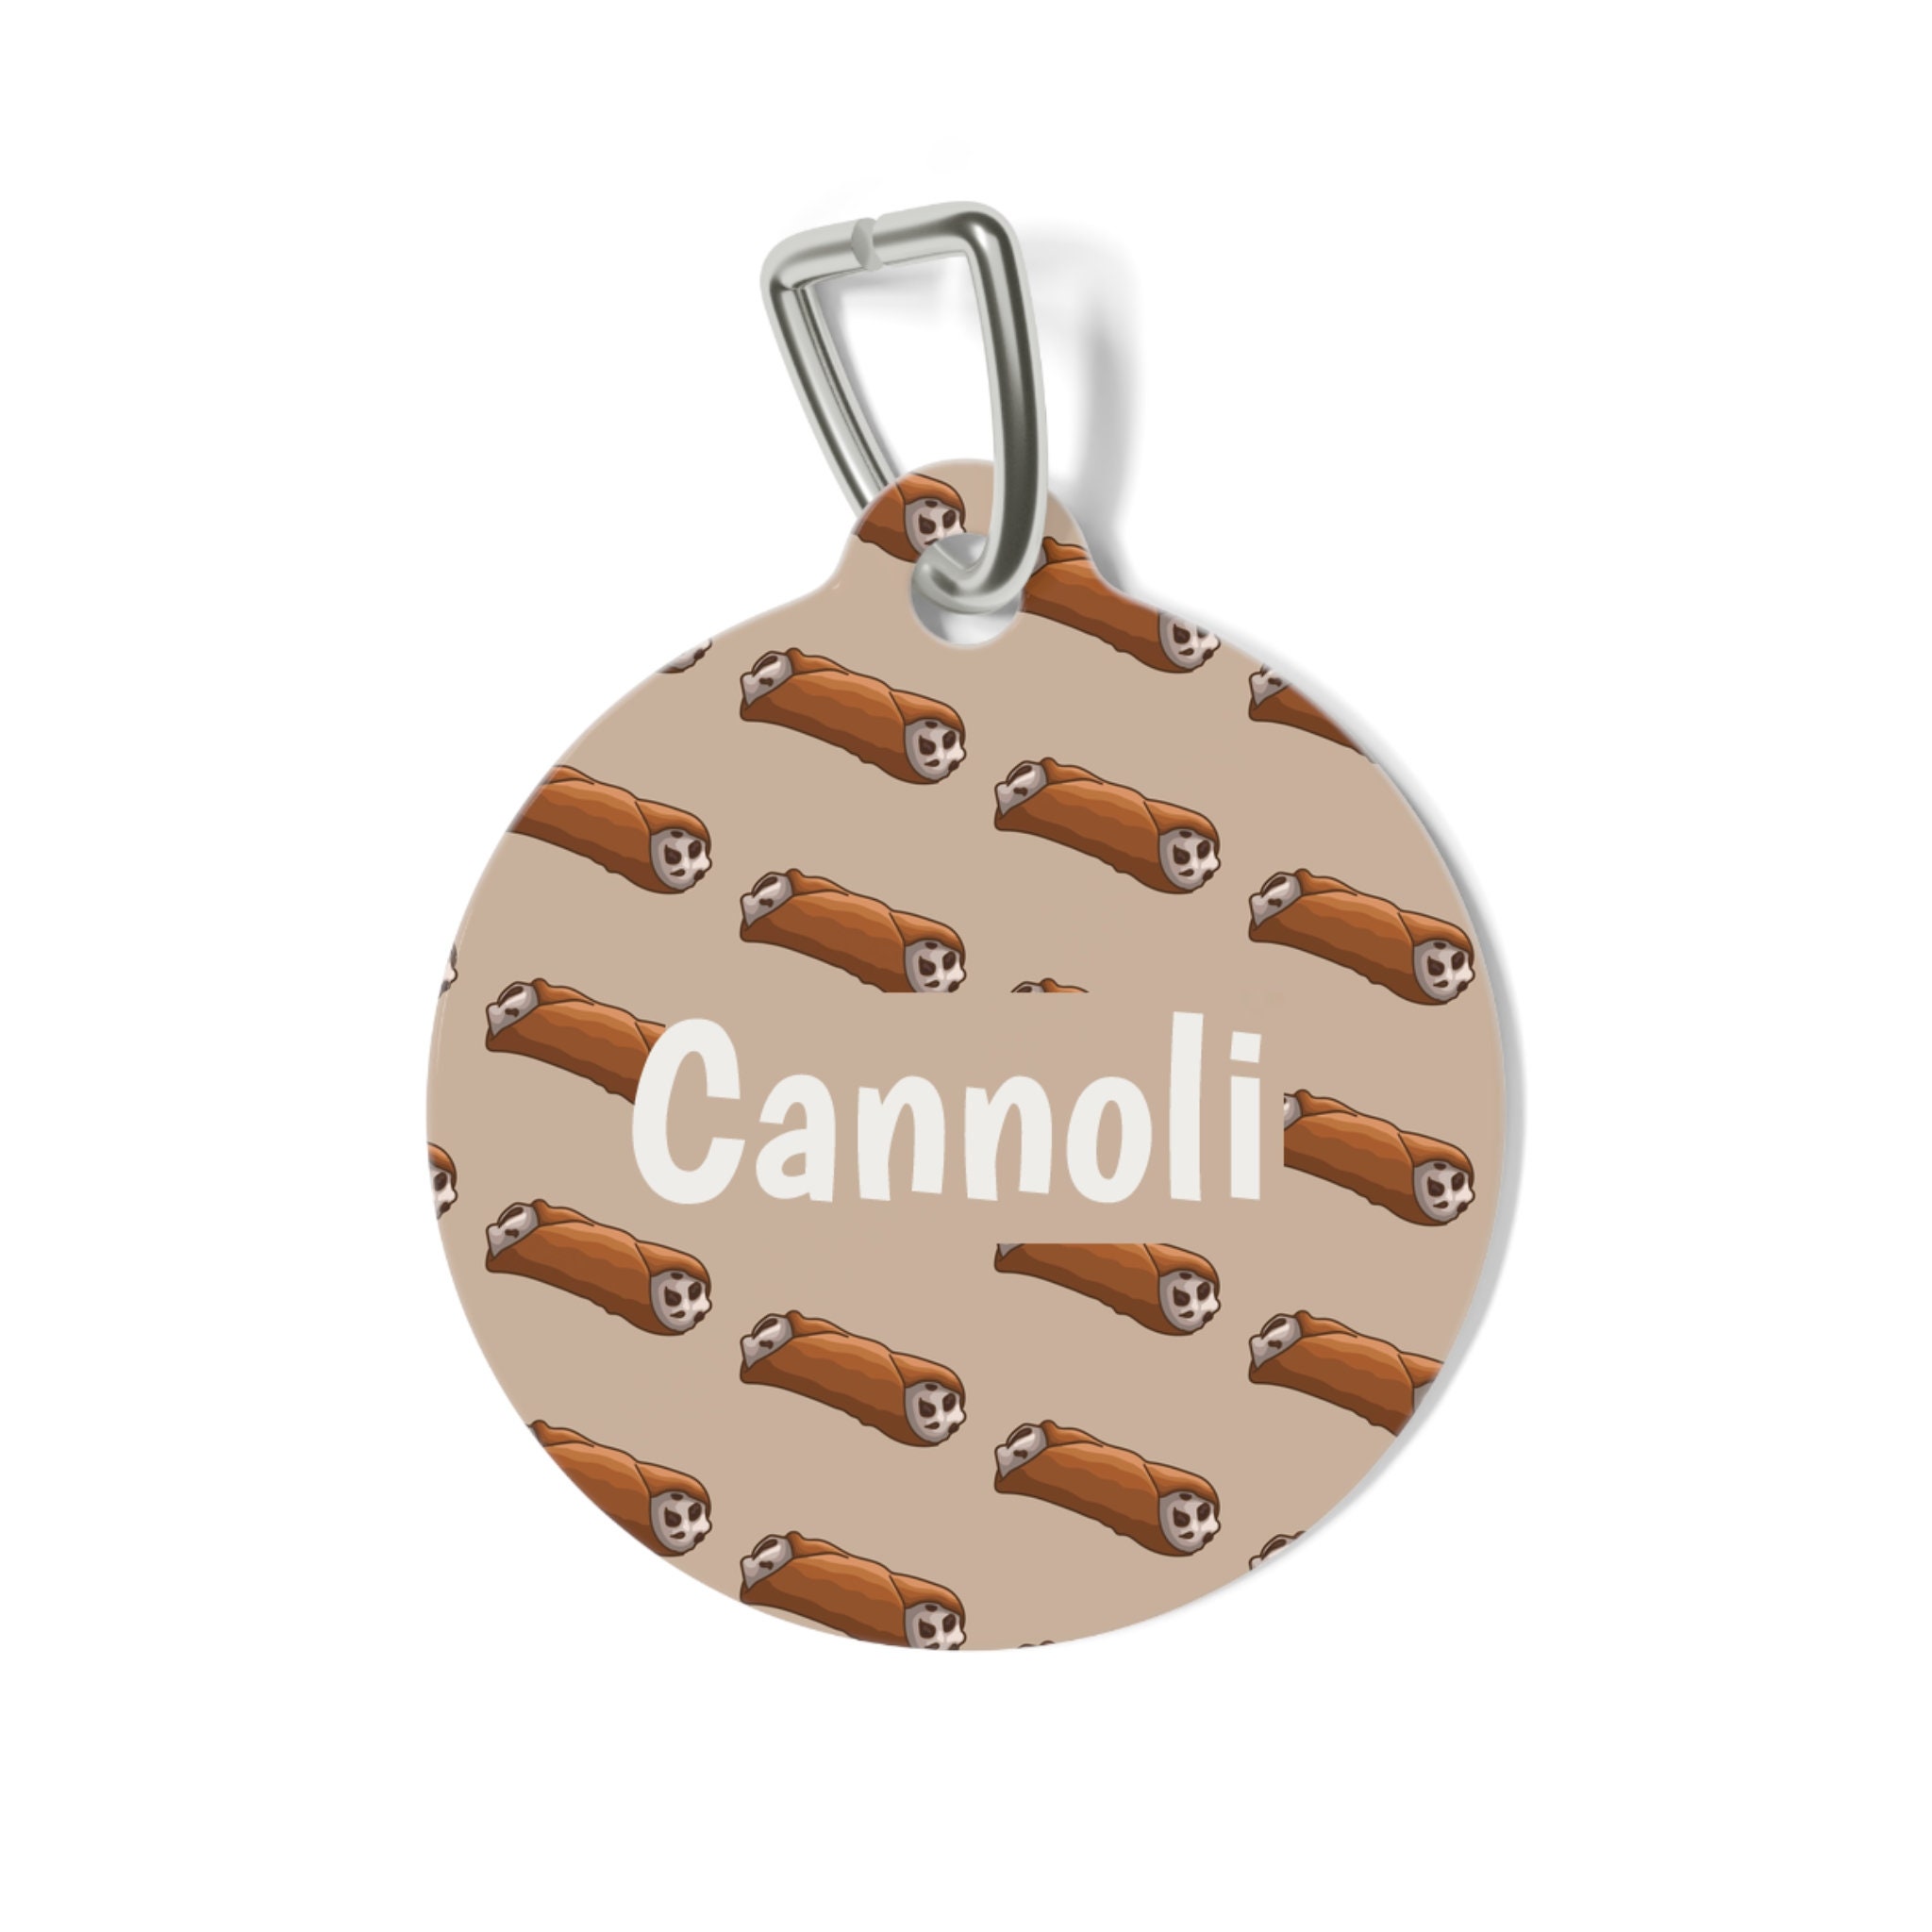  Funny Dirty Pun Fill Me Daddy Cannoli Naughty Gift for